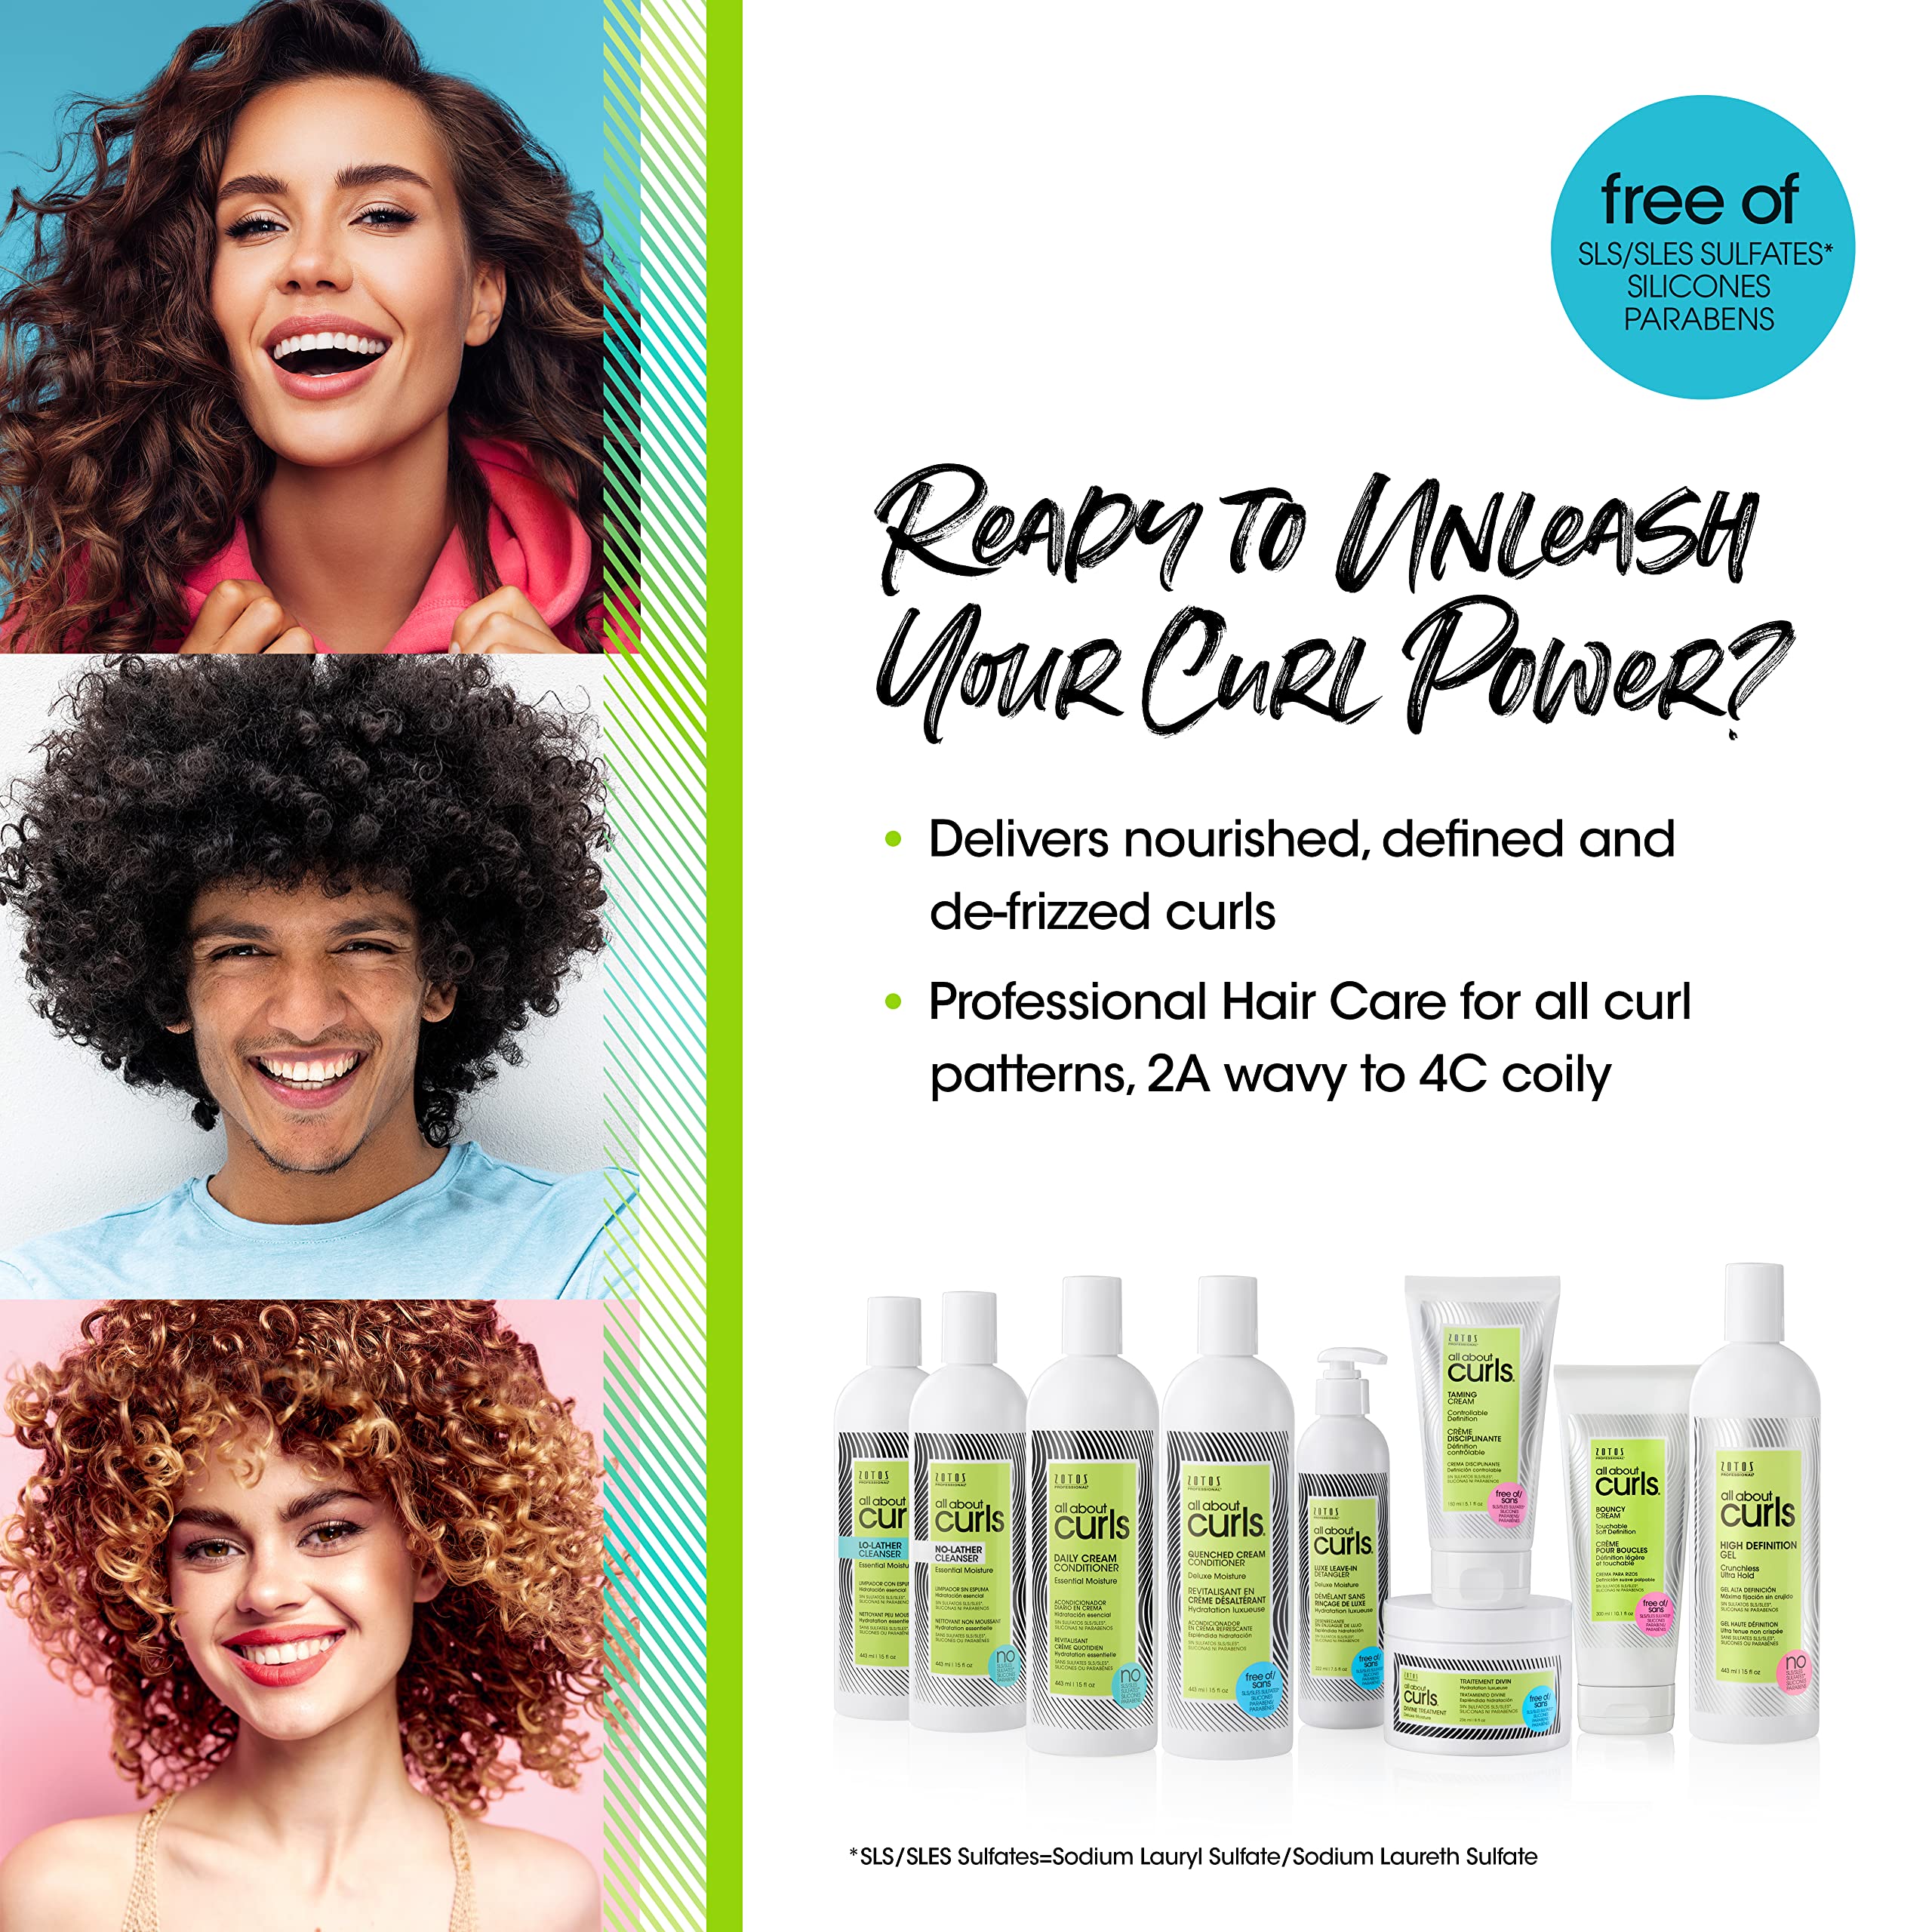 All About Curls High Definition Gel | Crunchless Ultra Hold | Define, Moisturize, De-Frizz | All Curly Hair Types